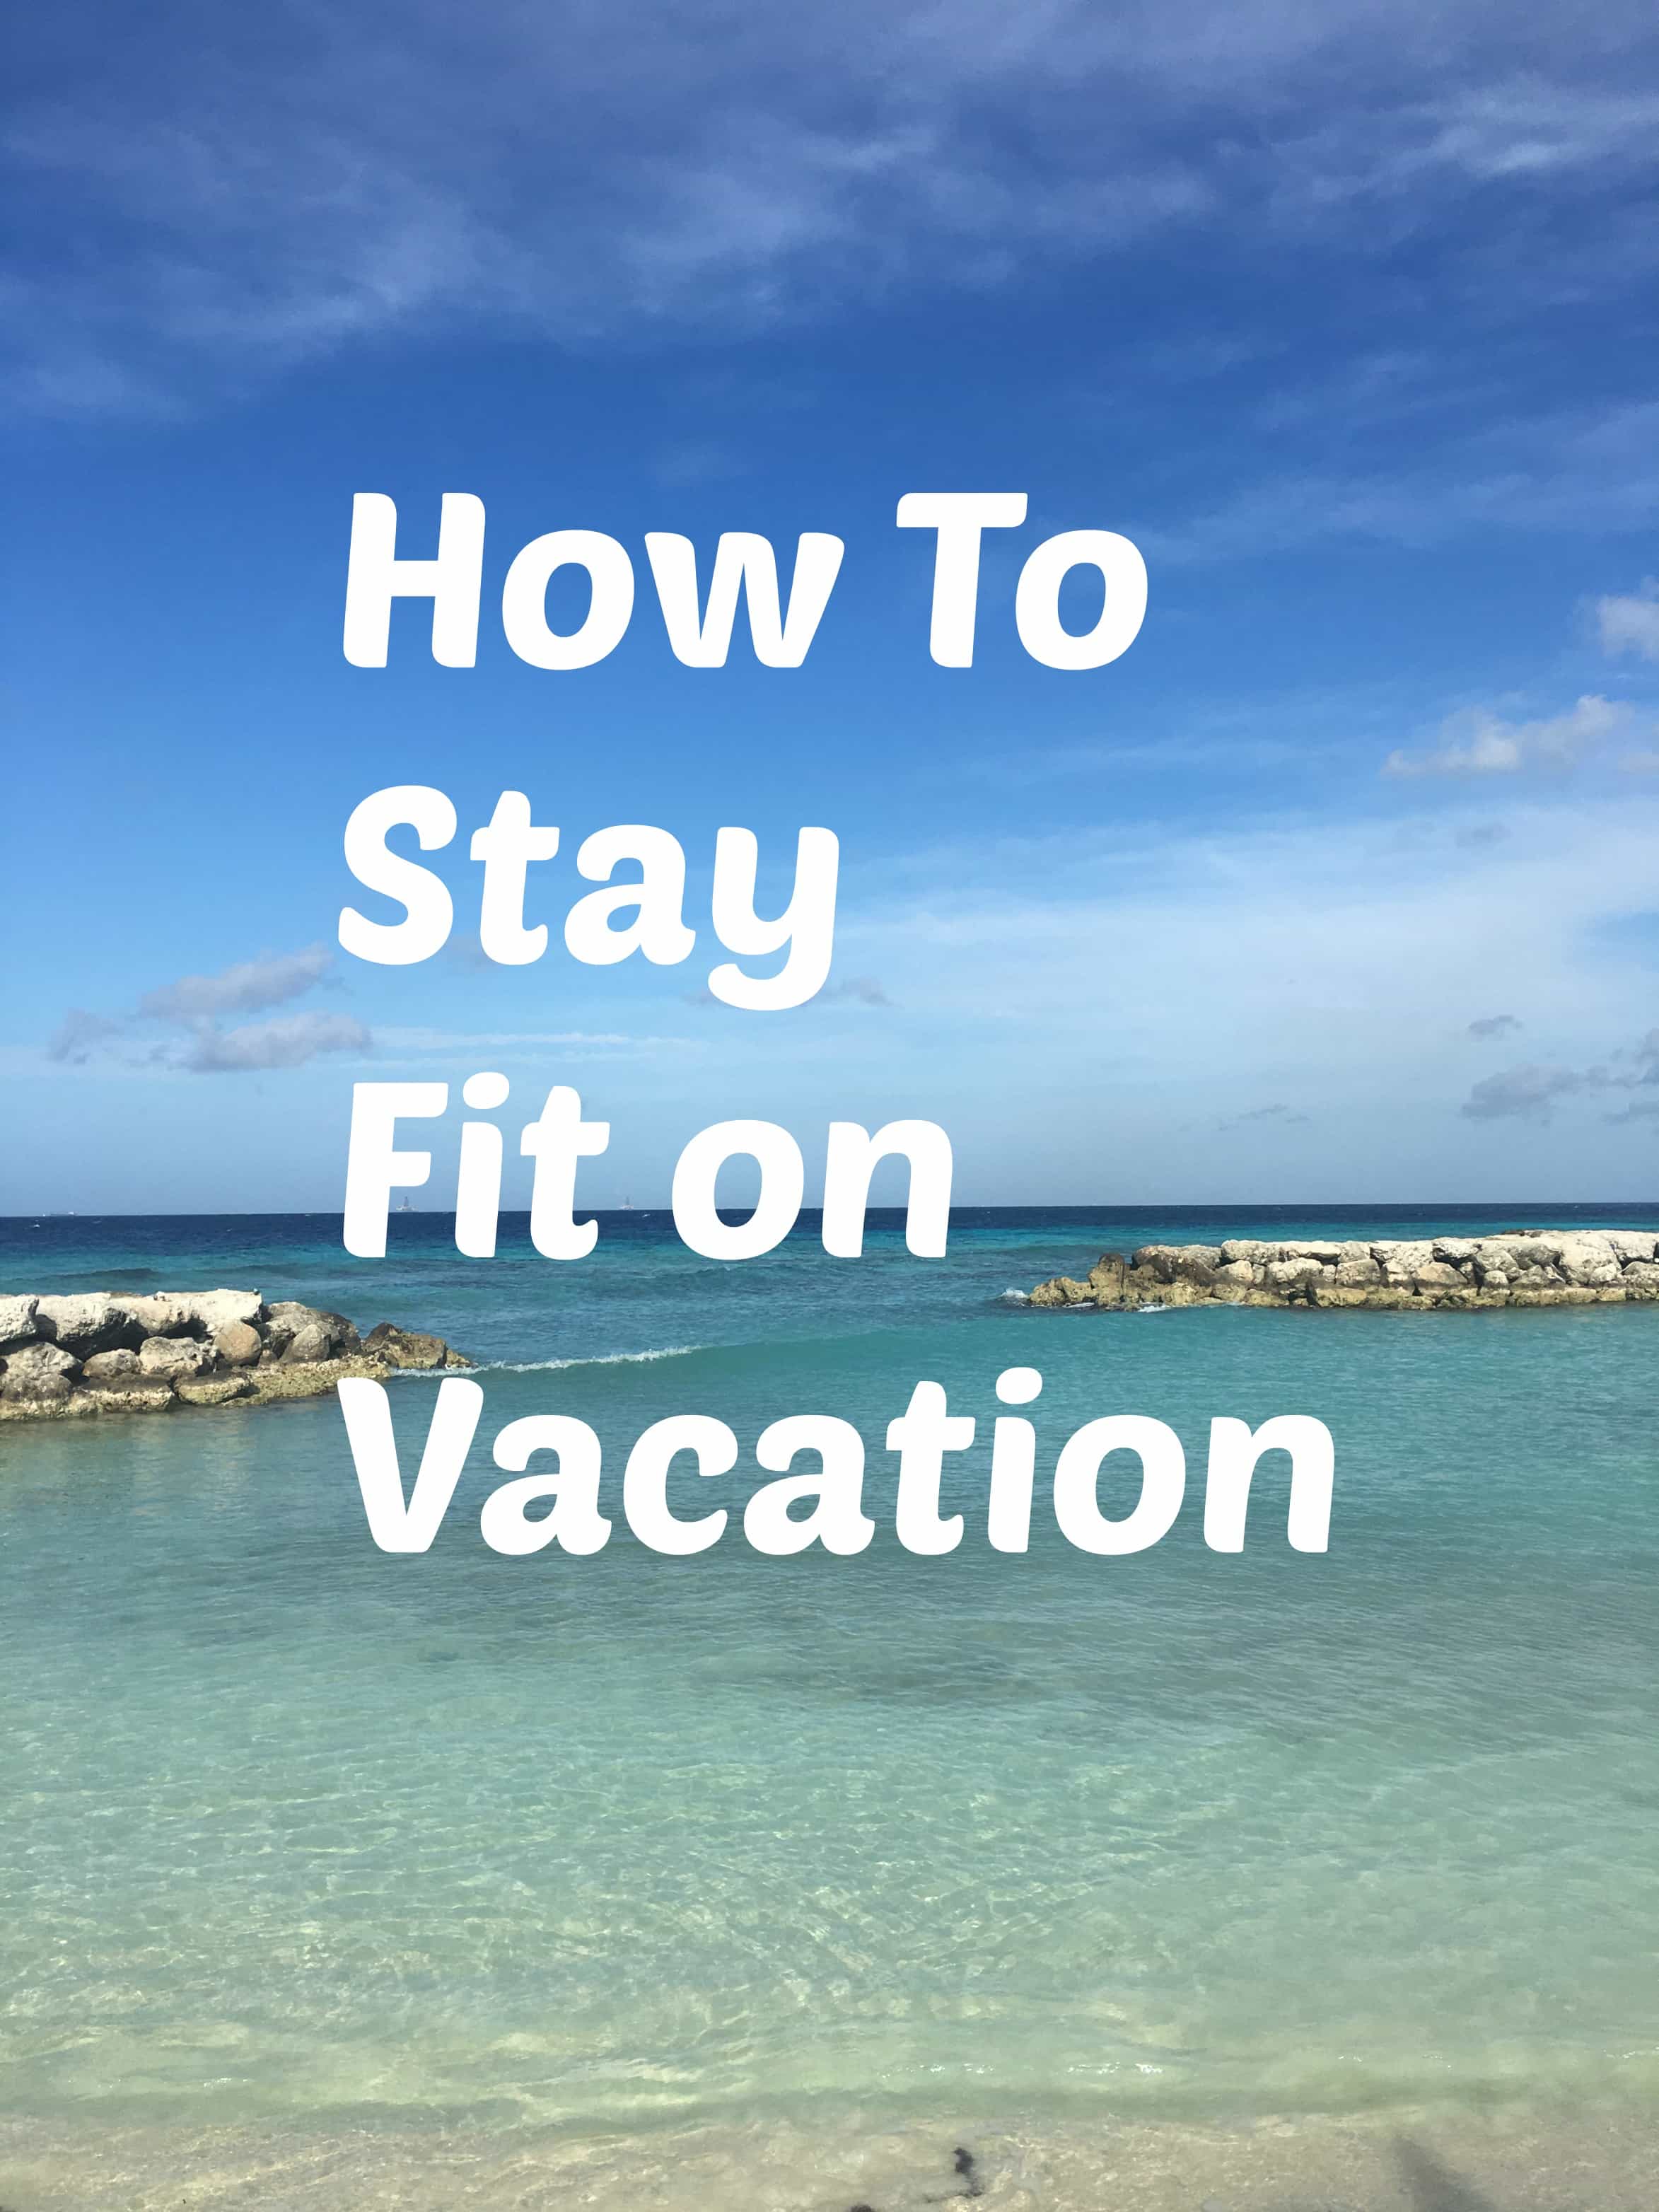 Sharing a few fitness tips and wellness ides on how to stay in shape on vacation!